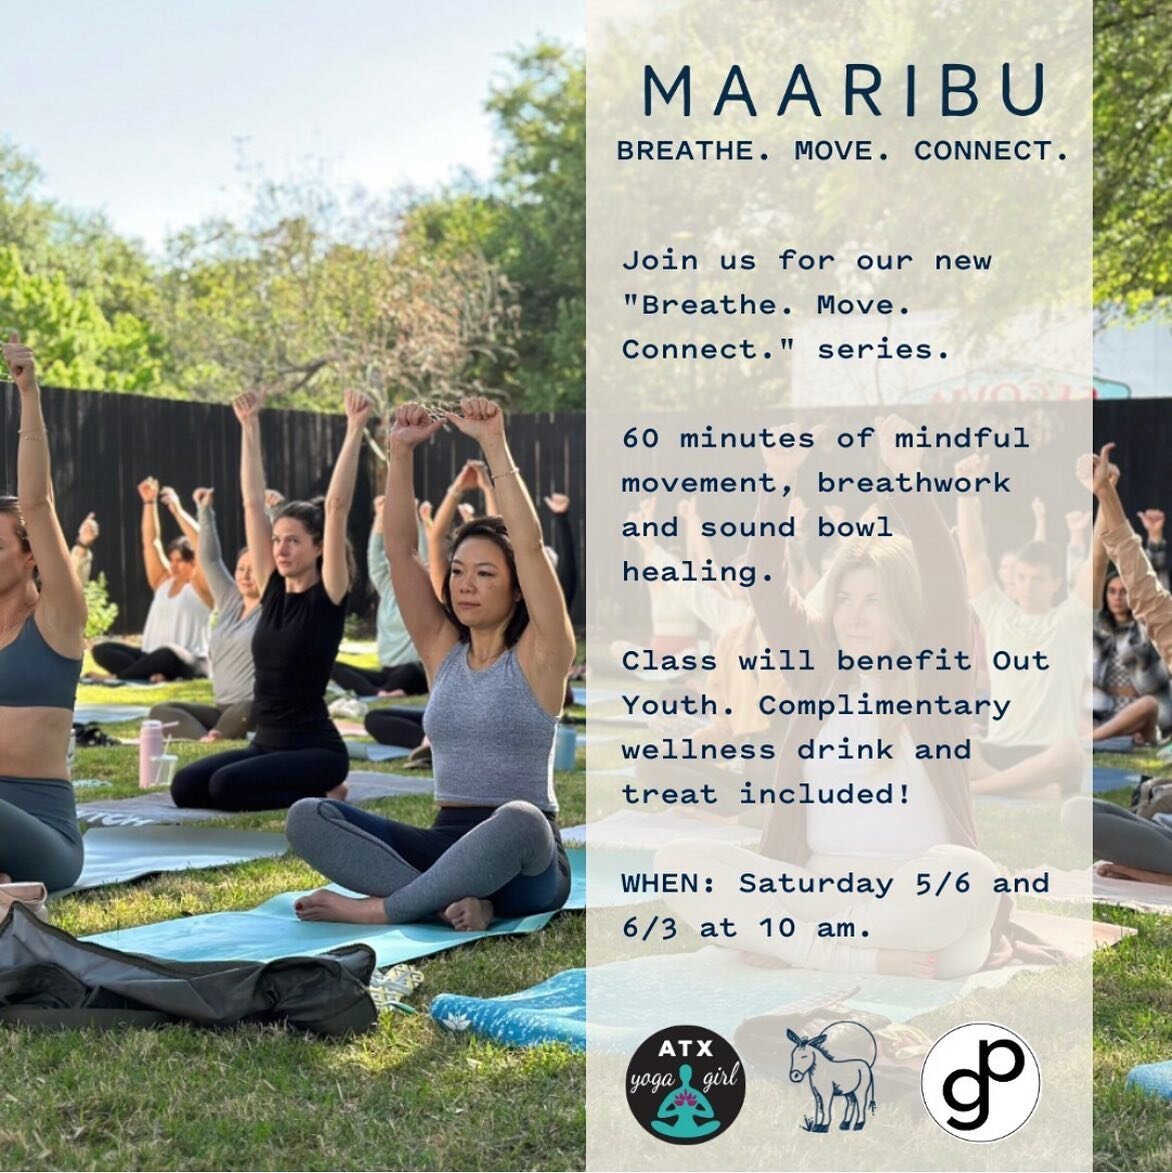 Breathe, Move, Connect. 
Join @gustavoapadron and me @maaribuatx for an hour of mindful movement, breathwork, and sound healing #cosmicnap to support your Saturday morning, May 6th at 10 a.m.
⁠
*This is a 3 part series benefitting Out Youth and our l